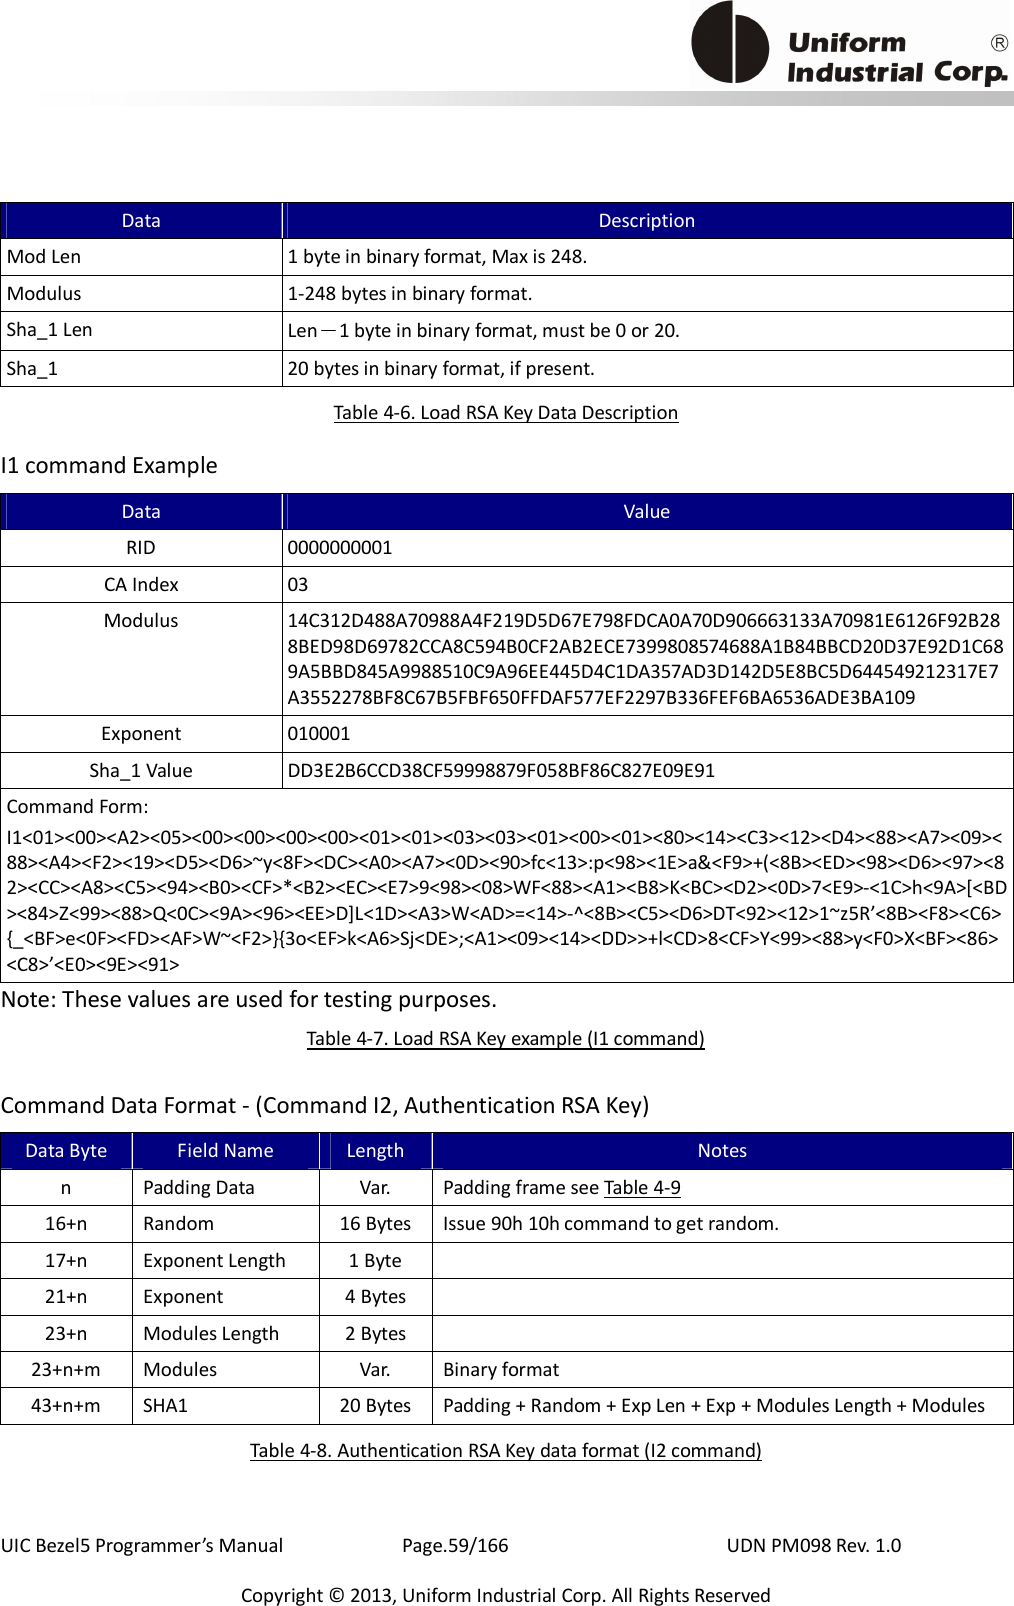                                           UIC Bezel5 Programmer’s Manual      Page.59/166                    UDN PM098 Rev. 1.0 Copyright © 2013, Uniform Industrial Corp. All Rights Reserved Data Description Mod Len  1 byte in binary format, Max is 248. Modulus  1-248 bytes in binary format. Sha_1 Len  Len－1 byte in binary format, must be 0 or 20. Sha_1  20 bytes in binary format, if present. Table 4-6. Load RSA Key Data Description I1 command Example Data Value RID  0000000001 CA Index  03 Modulus  14C312D488A70988A4F219D5D67E798FDCA0A70D906663133A70981E6126F92B288BED98D69782CCA8C594B0CF2AB2ECE7399808574688A1B84BBCD20D37E92D1C689A5BBD845A9988510C9A96EE445D4C1DA357AD3D142D5E8BC5D644549212317E7A3552278BF8C67B5FBF650FFDAF577EF2297B336FEF6BA6536ADE3BA109 Exponent  010001 Sha_1 Value  DD3E2B6CCD38CF59998879F058BF86C827E09E91 Command Form: I1&lt;01&gt;&lt;00&gt;&lt;A2&gt;&lt;05&gt;&lt;00&gt;&lt;00&gt;&lt;00&gt;&lt;00&gt;&lt;01&gt;&lt;01&gt;&lt;03&gt;&lt;03&gt;&lt;01&gt;&lt;00&gt;&lt;01&gt;&lt;80&gt;&lt;14&gt;&lt;C3&gt;&lt;12&gt;&lt;D4&gt;&lt;88&gt;&lt;A7&gt;&lt;09&gt;&lt;88&gt;&lt;A4&gt;&lt;F2&gt;&lt;19&gt;&lt;D5&gt;&lt;D6&gt;~y&lt;8F&gt;&lt;DC&gt;&lt;A0&gt;&lt;A7&gt;&lt;0D&gt;&lt;90&gt;fc&lt;13&gt;:p&lt;98&gt;&lt;1E&gt;a&amp;&lt;F9&gt;+(&lt;8B&gt;&lt;ED&gt;&lt;98&gt;&lt;D6&gt;&lt;97&gt;&lt;82&gt;&lt;CC&gt;&lt;A8&gt;&lt;C5&gt;&lt;94&gt;&lt;B0&gt;&lt;CF&gt;*&lt;B2&gt;&lt;EC&gt;&lt;E7&gt;9&lt;98&gt;&lt;08&gt;WF&lt;88&gt;&lt;A1&gt;&lt;B8&gt;K&lt;BC&gt;&lt;D2&gt;&lt;0D&gt;7&lt;E9&gt;-&lt;1C&gt;h&lt;9A&gt;[&lt;BD&gt;&lt;84&gt;Z&lt;99&gt;&lt;88&gt;Q&lt;0C&gt;&lt;9A&gt;&lt;96&gt;&lt;EE&gt;D]L&lt;1D&gt;&lt;A3&gt;W&lt;AD&gt;=&lt;14&gt;-^&lt;8B&gt;&lt;C5&gt;&lt;D6&gt;DT&lt;92&gt;&lt;12&gt;1~z5R’&lt;8B&gt;&lt;F8&gt;&lt;C6&gt;{_&lt;BF&gt;e&lt;0F&gt;&lt;FD&gt;&lt;AF&gt;W~&lt;F2&gt;}{3o&lt;EF&gt;k&lt;A6&gt;Sj&lt;DE&gt;;&lt;A1&gt;&lt;09&gt;&lt;14&gt;&lt;DD&gt;&gt;+l&lt;CD&gt;8&lt;CF&gt;Y&lt;99&gt;&lt;88&gt;y&lt;F0&gt;X&lt;BF&gt;&lt;86&gt;&lt;C8&gt;’&lt;E0&gt;&lt;9E&gt;&lt;91&gt; Note: These values are used for testing purposes. Table 4-7. Load RSA Key example (I1 command) Command Data Format - (Command I2, Authentication RSA Key) Data Byte  Field Name  Length  Notes n  Padding Data  Var.  Padding frame see Table 4-9 16+n  Random  16 Bytes  Issue 90h 10h command to get random. 17+n  Exponent Length  1 Byte   21+n  Exponent  4 Bytes   23+n  Modules Length  2 Bytes   23+n+m  Modules  Var.  Binary format 43+n+m  SHA1  20 Bytes  Padding + Random + Exp Len + Exp + Modules Length + Modules Table 4-8. Authentication RSA Key data format (I2 command) 